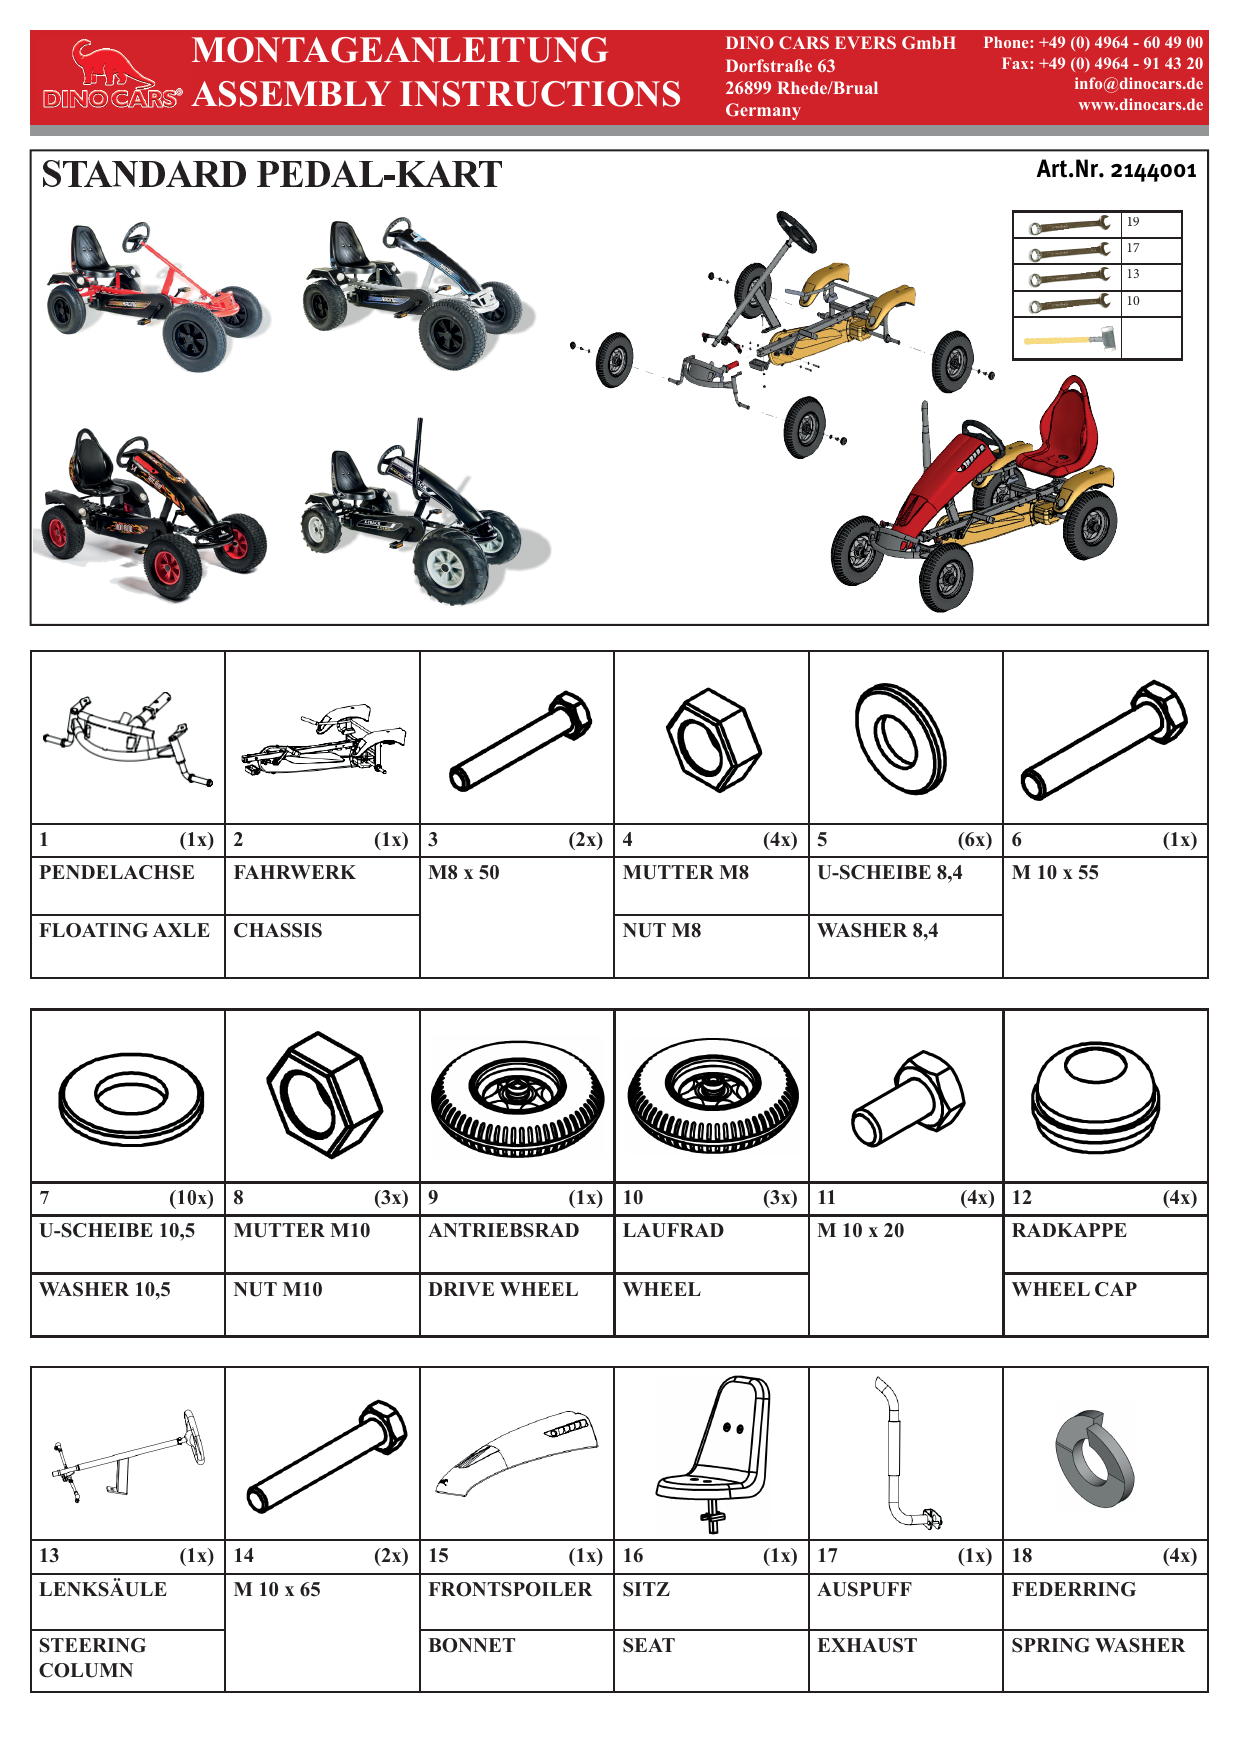 DINO CARS Standard Pedal-Kart Assembly Instructions